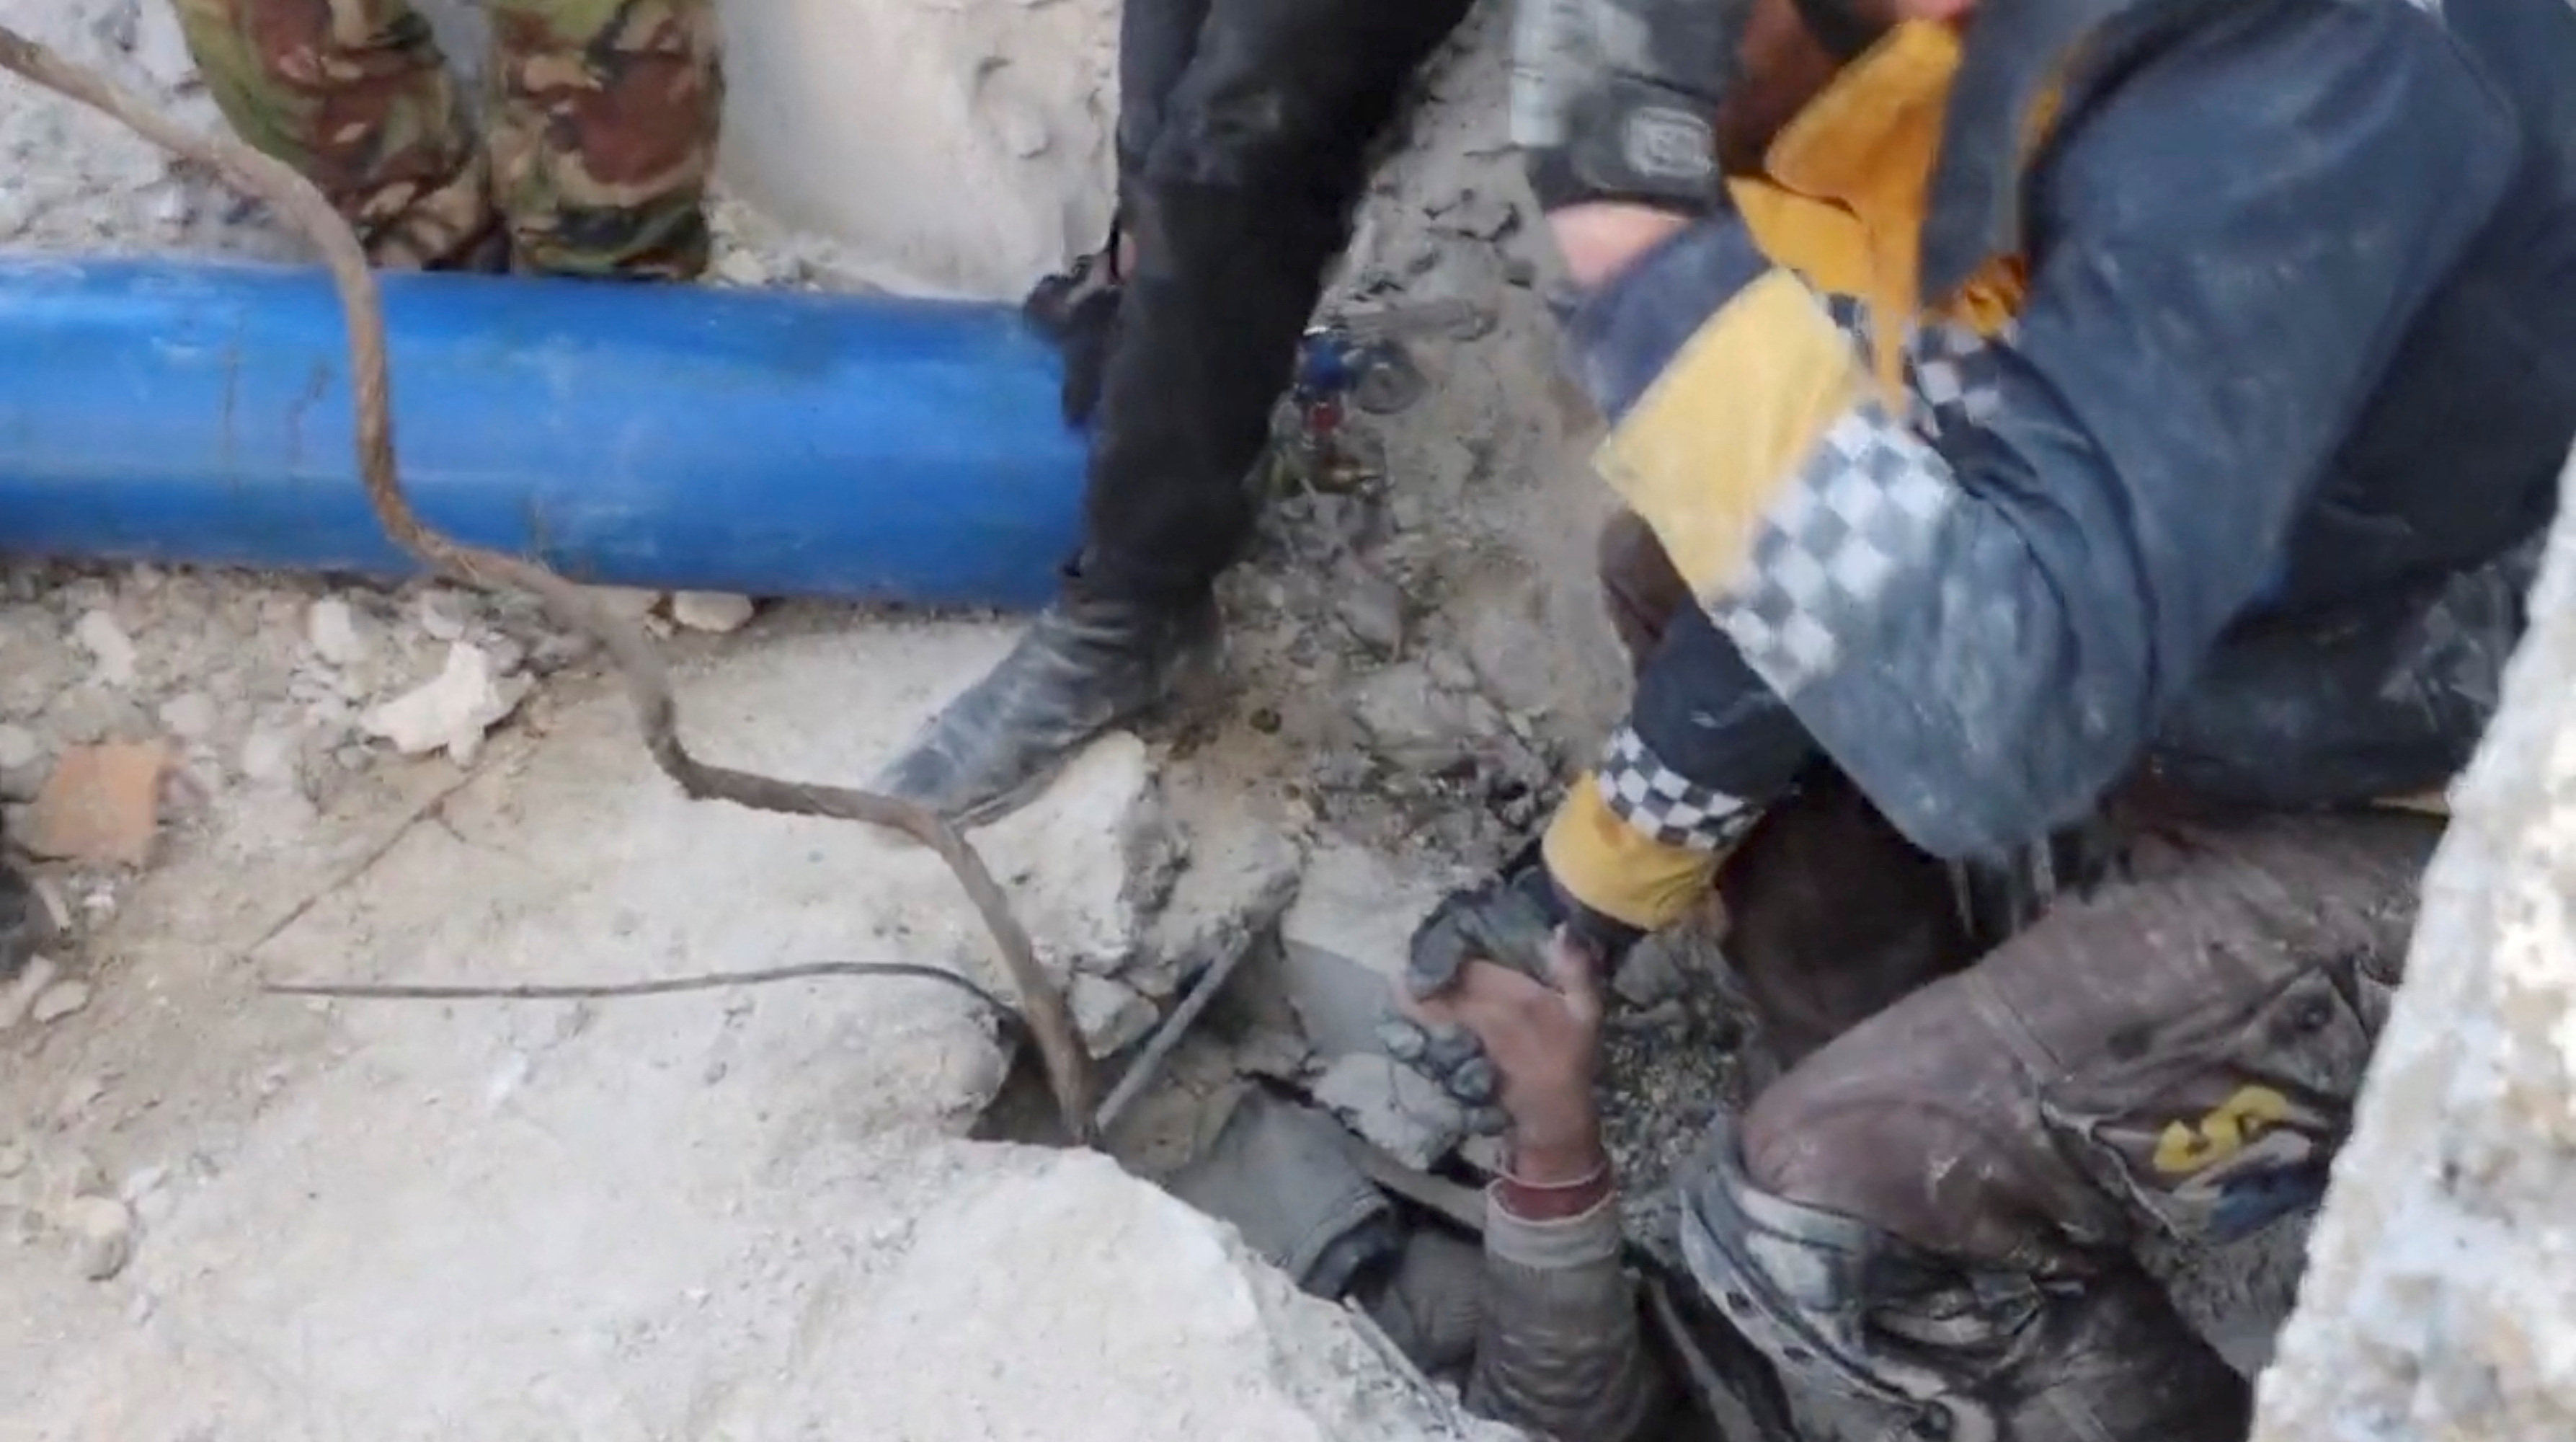 Rescuers pull out a child from under rubble, in Jandaris